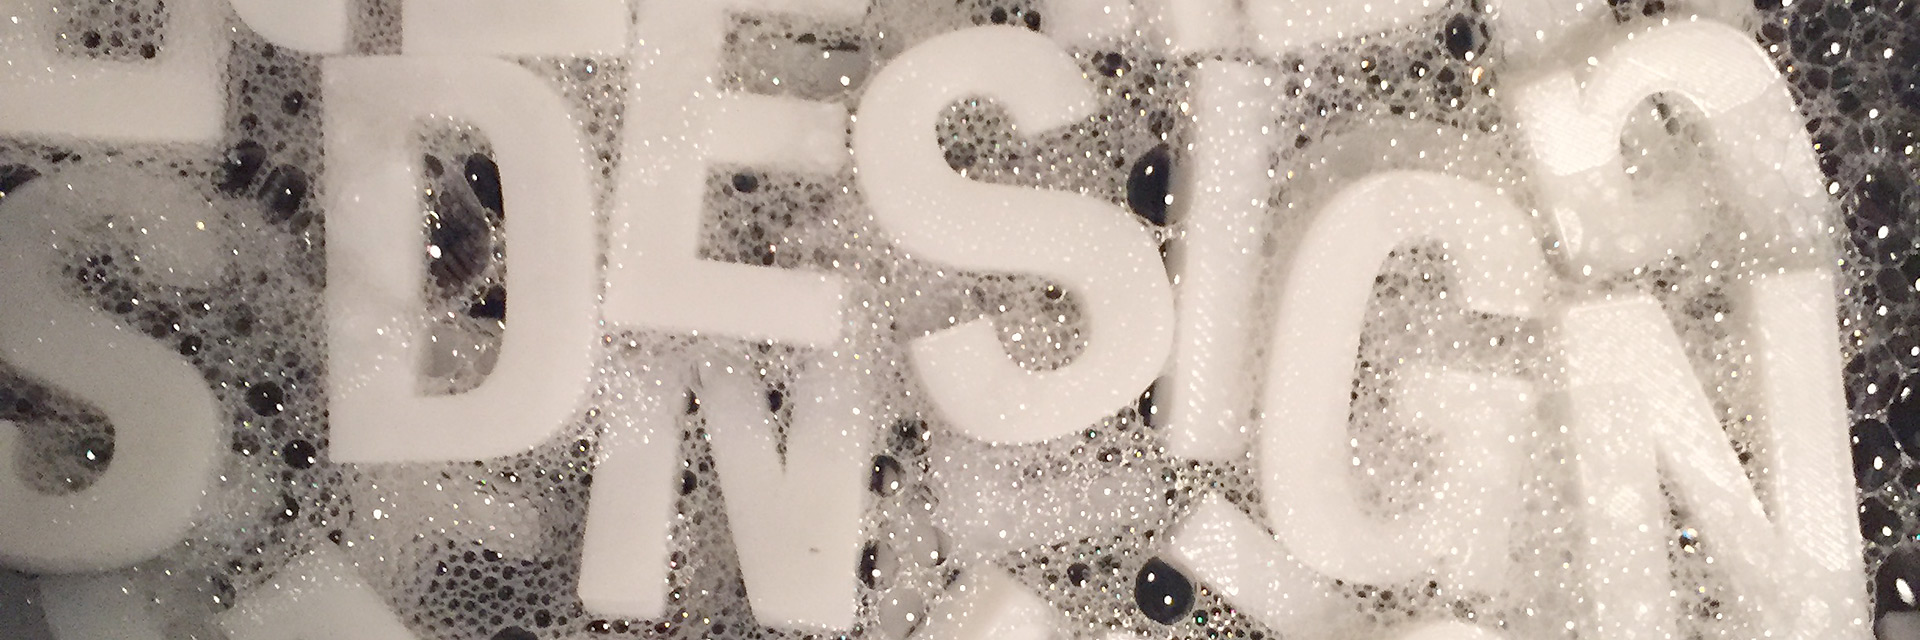 3D printed letters in a curing bath that spell "Design"